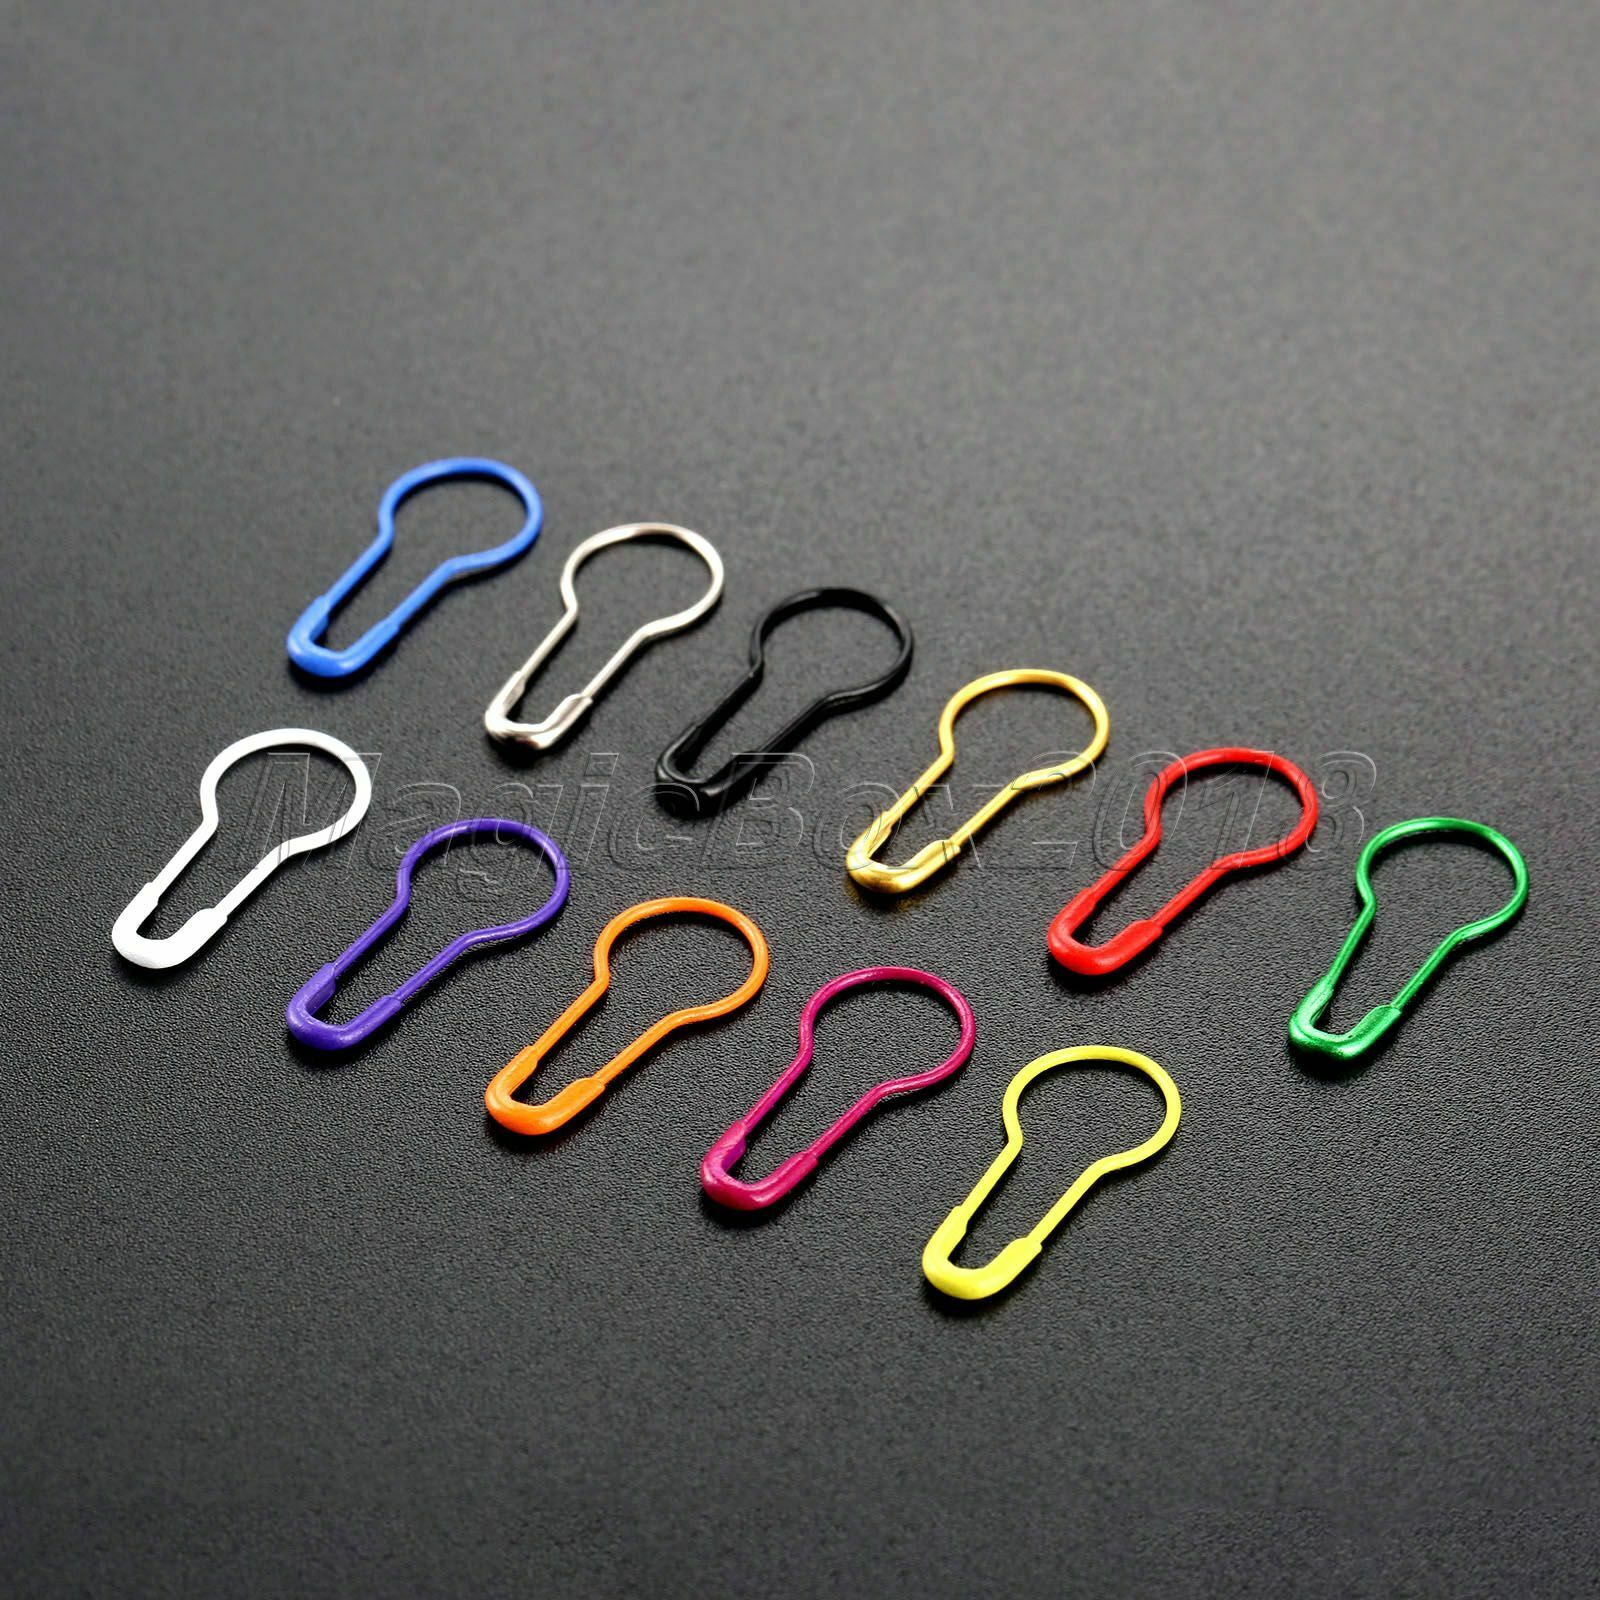 100pcs Calabash Gourd Shape Metal Pins Clips Knitting Stitch Markers Hangtag